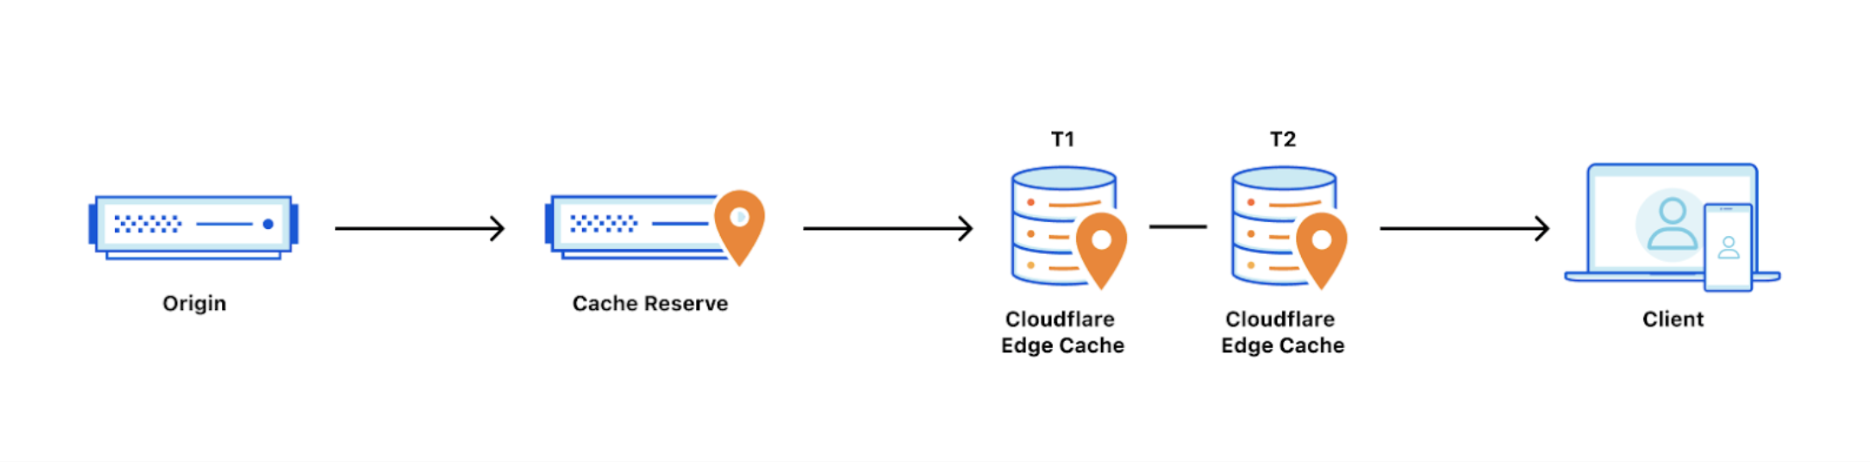 Content served from origin and getting cached in Cache Reserve, and Edge Cache Data Centers (T1=upper-tier, T2=lower-tier) on its way back to the client